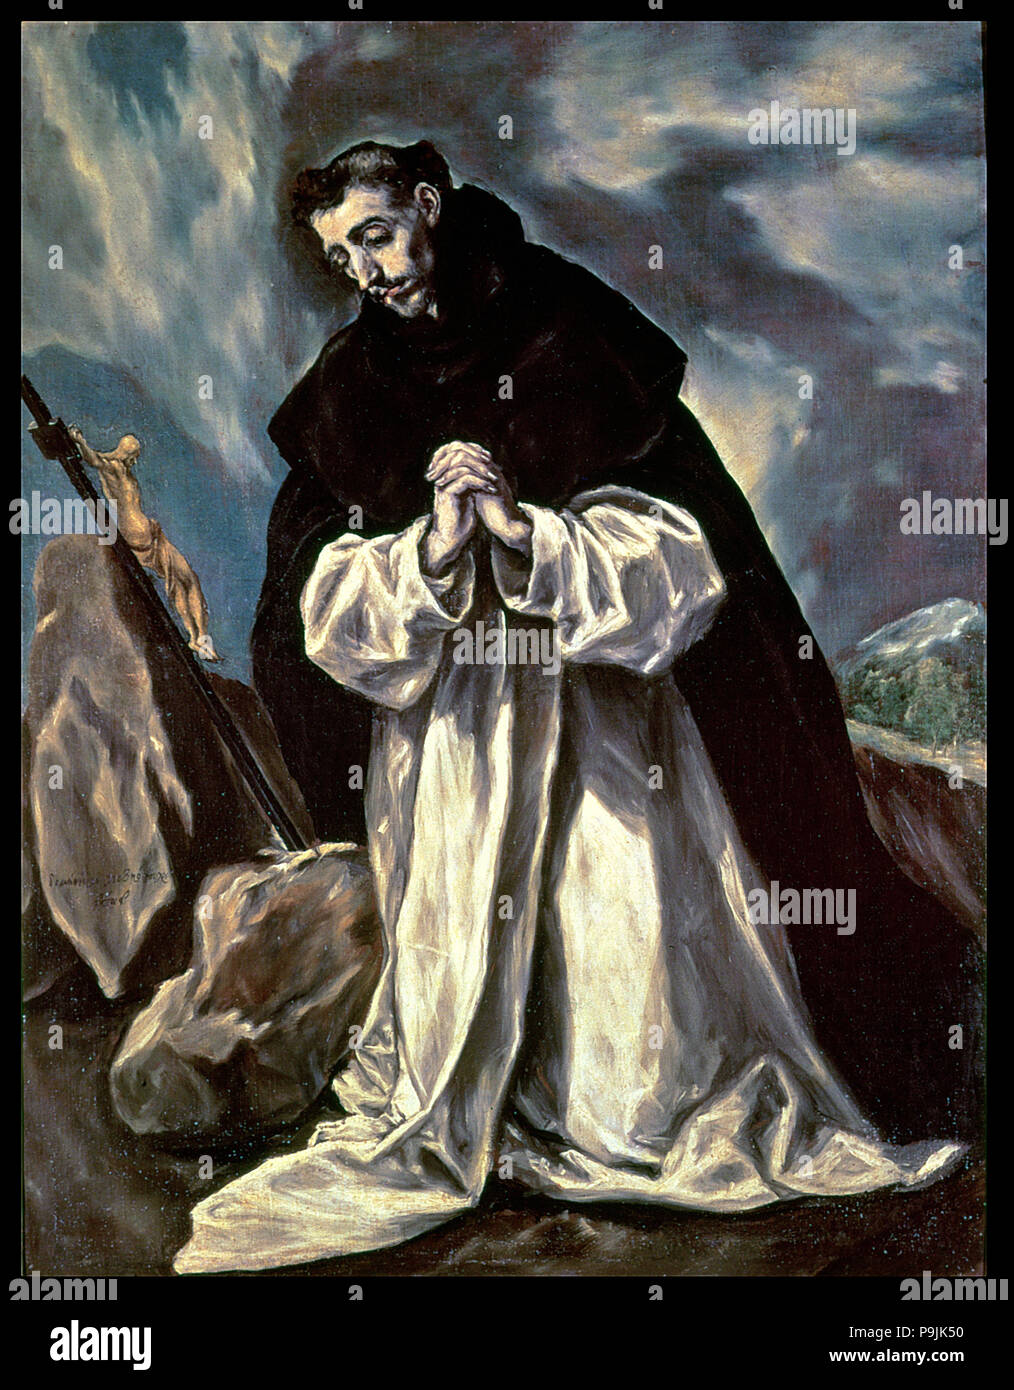 Santo Domingo of Guzmán (1170-1221), founder of the Order of Friars Preachers or Dominicans. Stock Photo